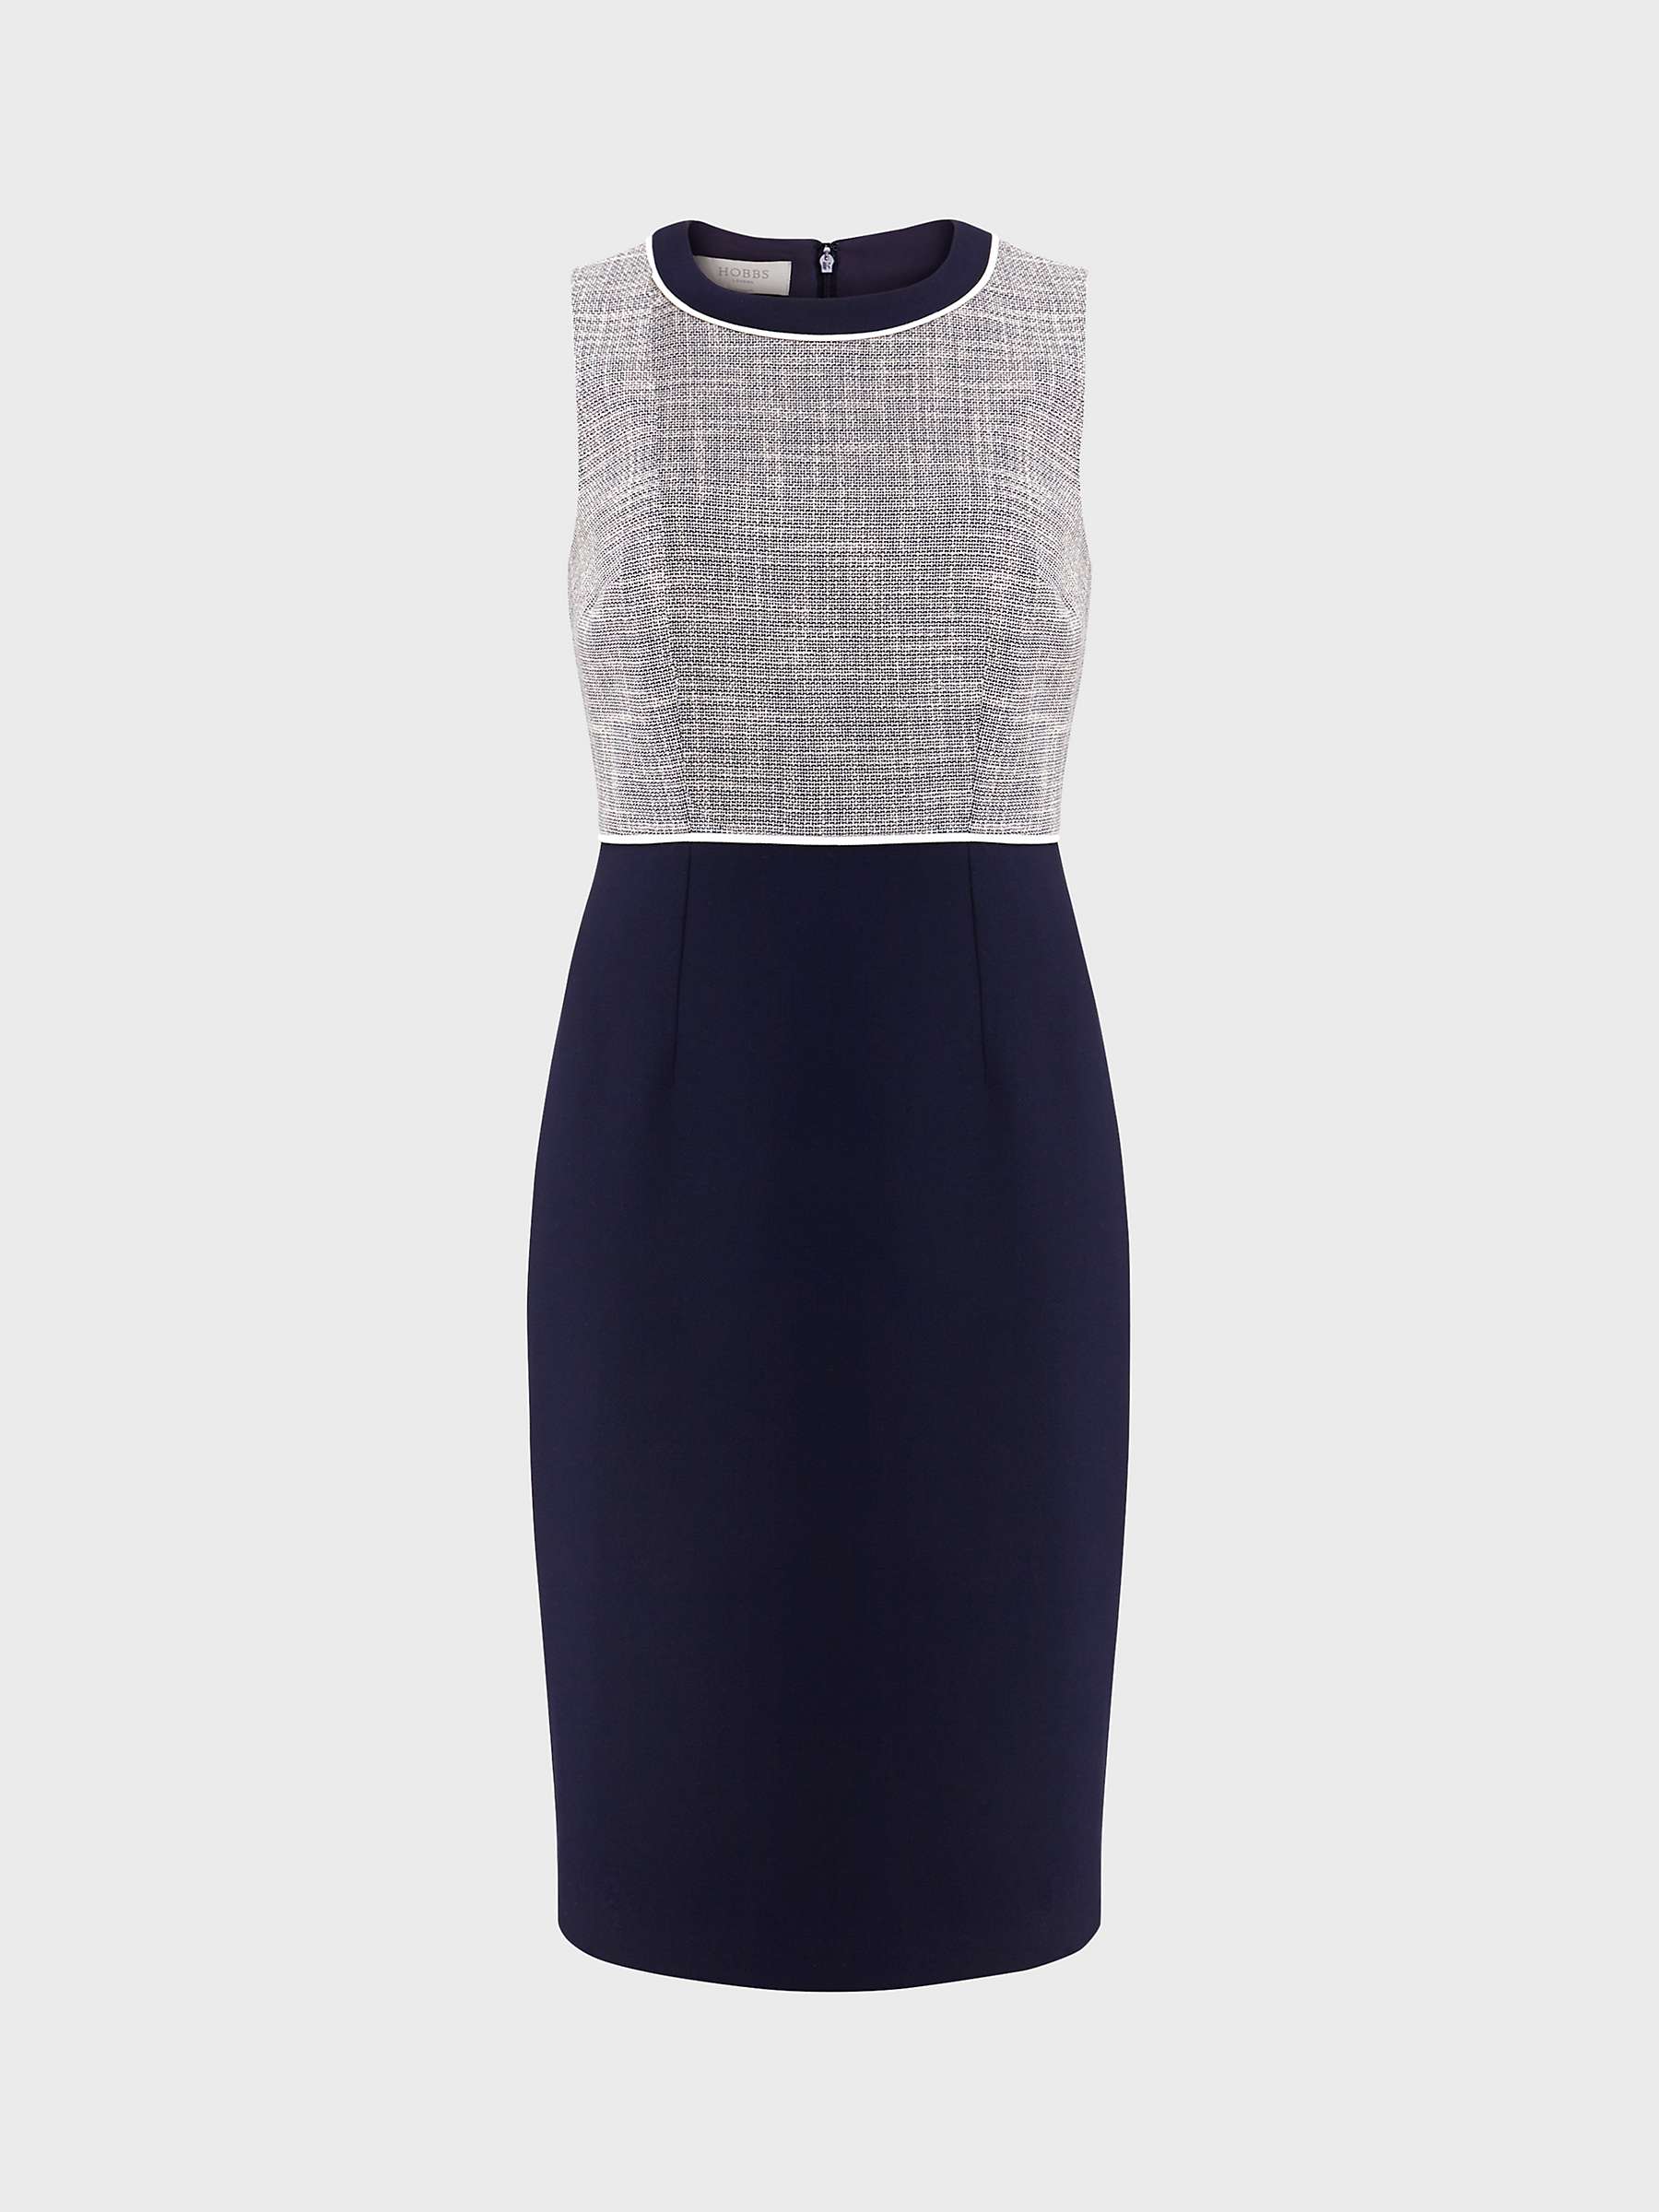 Buy Hobbs Laurie Check Knee Length Dress, Navy/Ivory Online at johnlewis.com